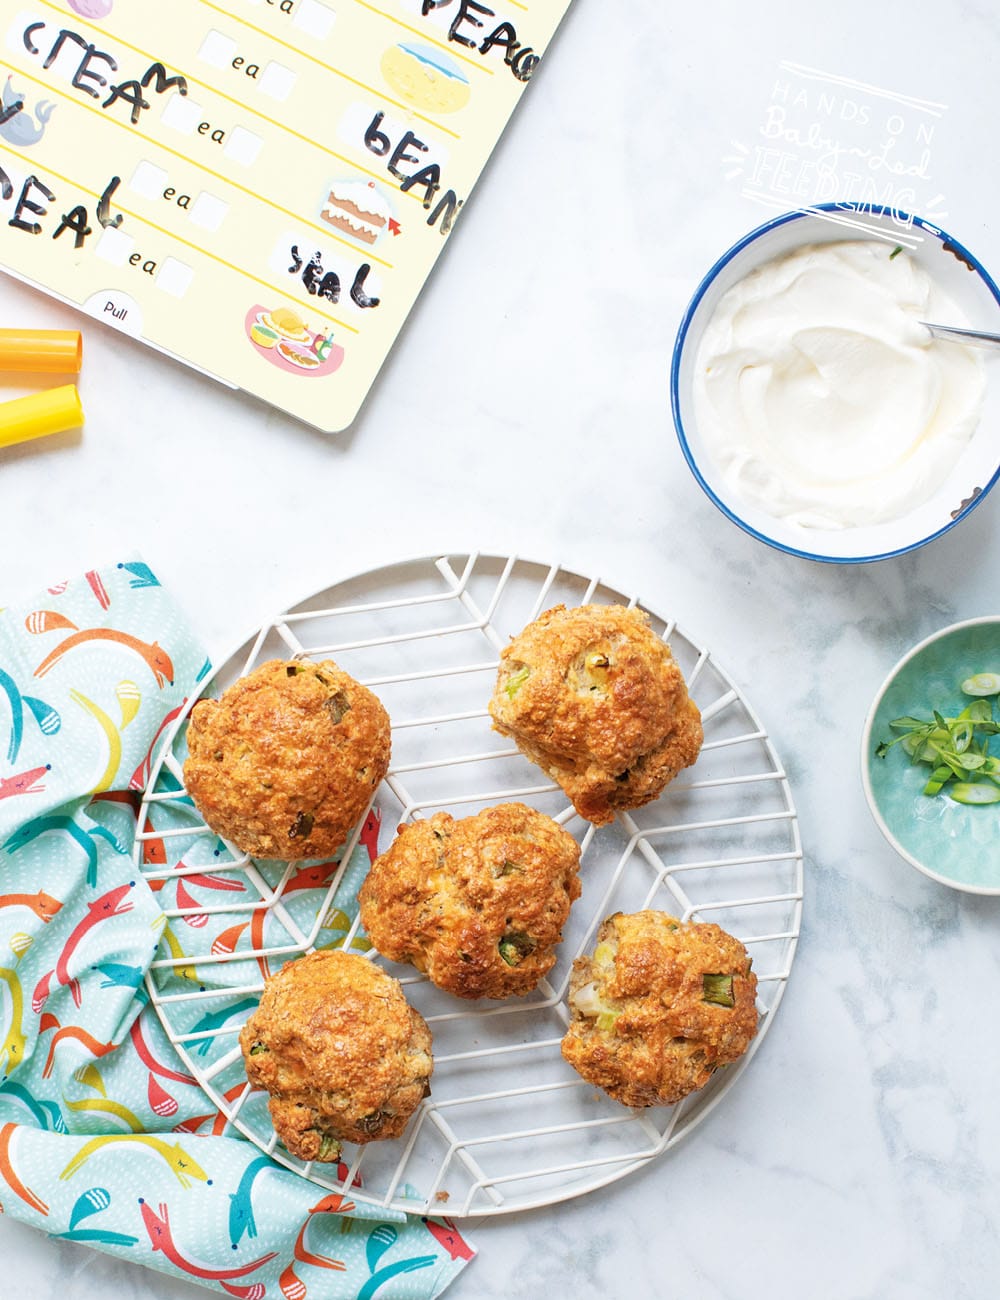 Savory snack for toddlers and babies! These savory scones are an amazing lunchbox idea and travel snack for kids! Scones are the perfect texture and size for little hands. Pack this savory finger food for your next adventure! #babyledfeeding #babyledweaning #scones #fingerfood #savorysnacks